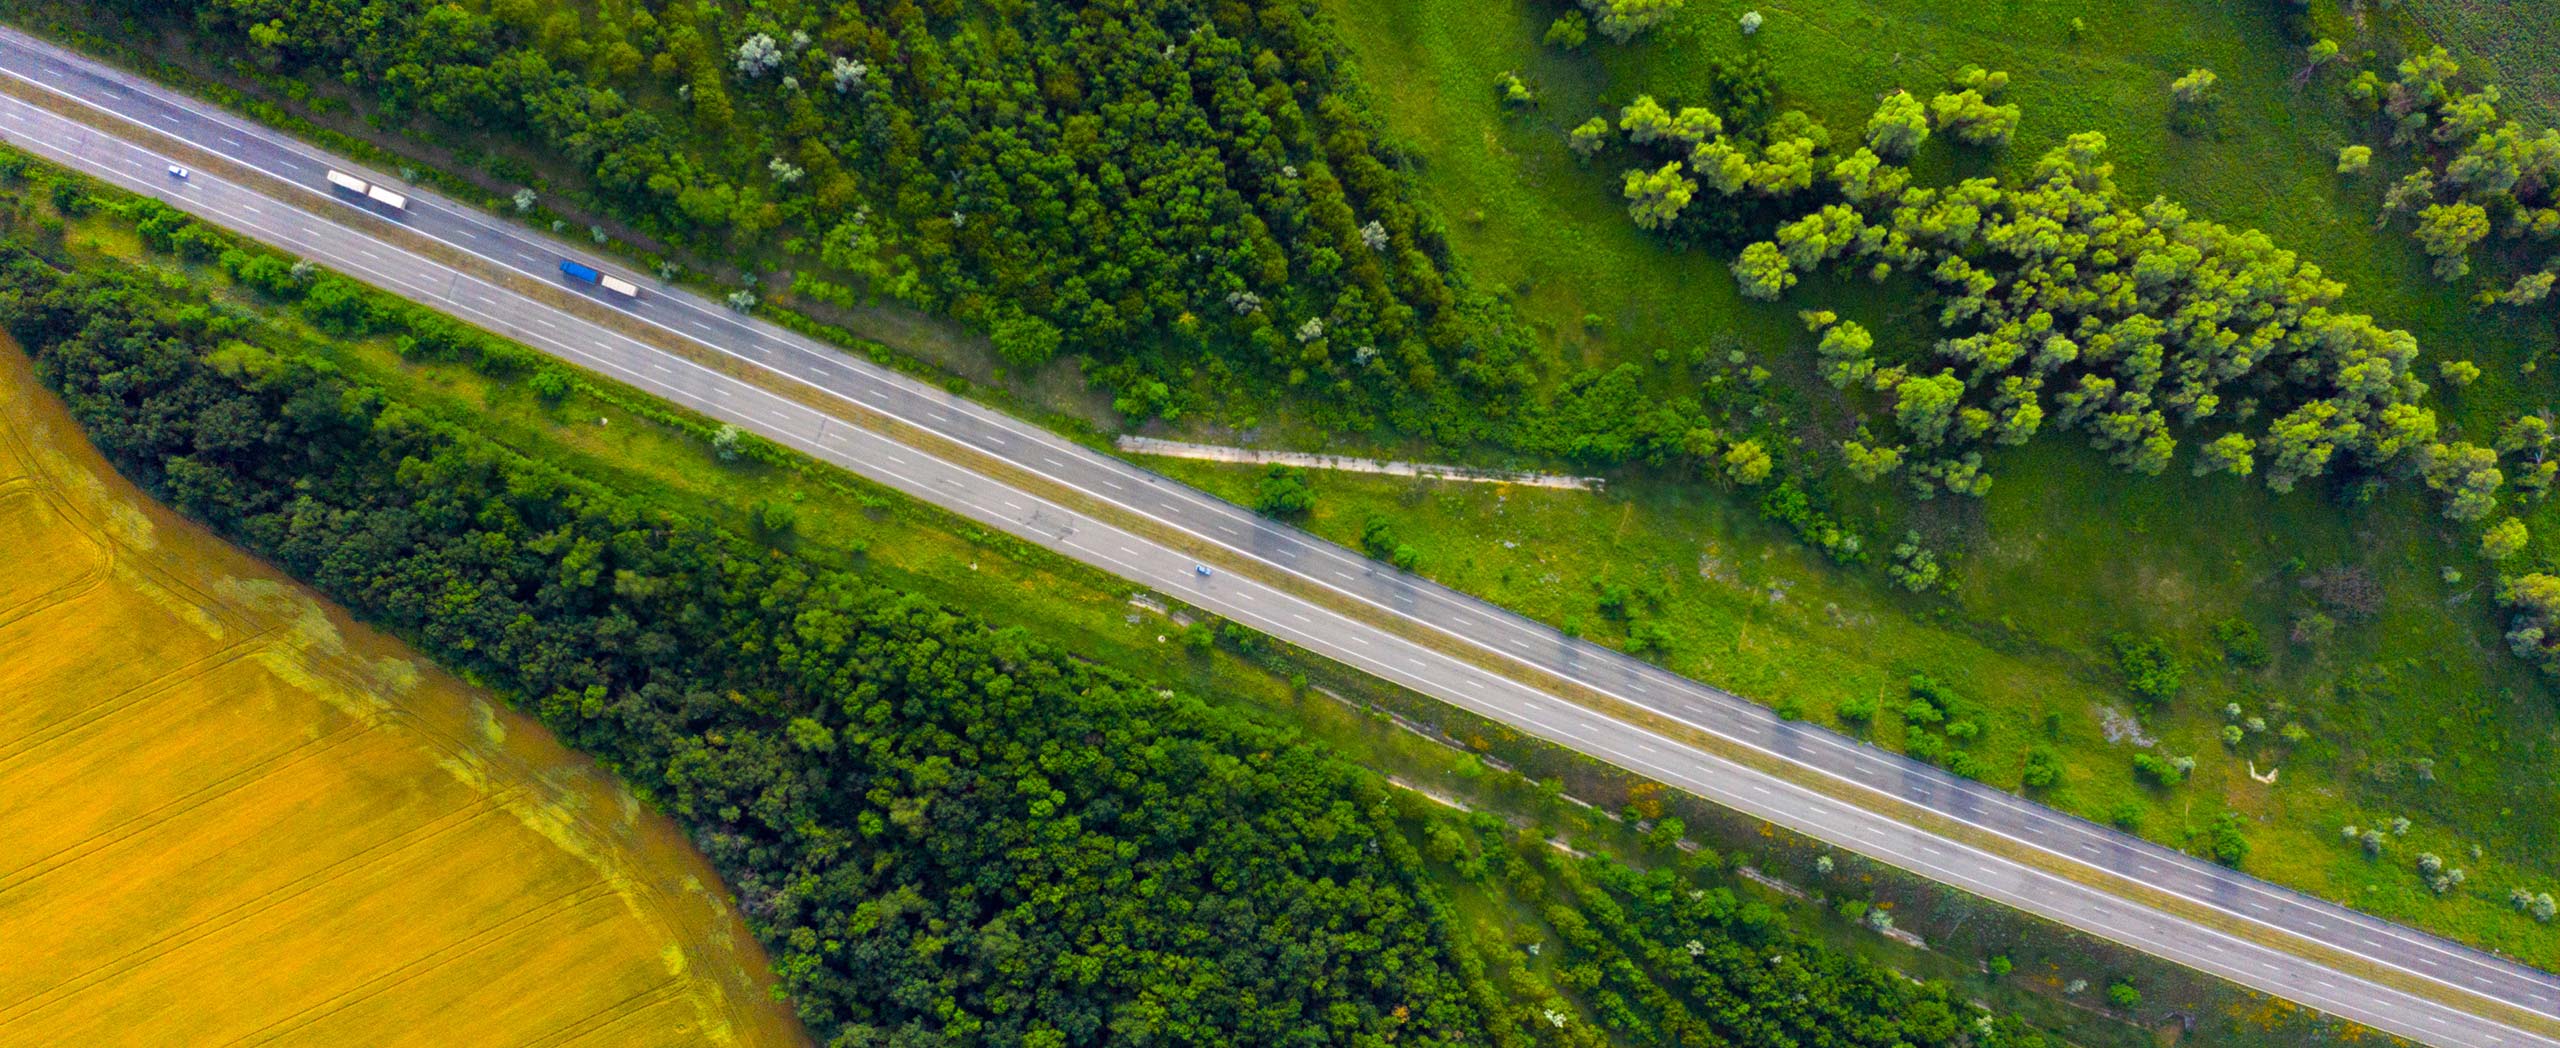 image of highway in between green grass and trees